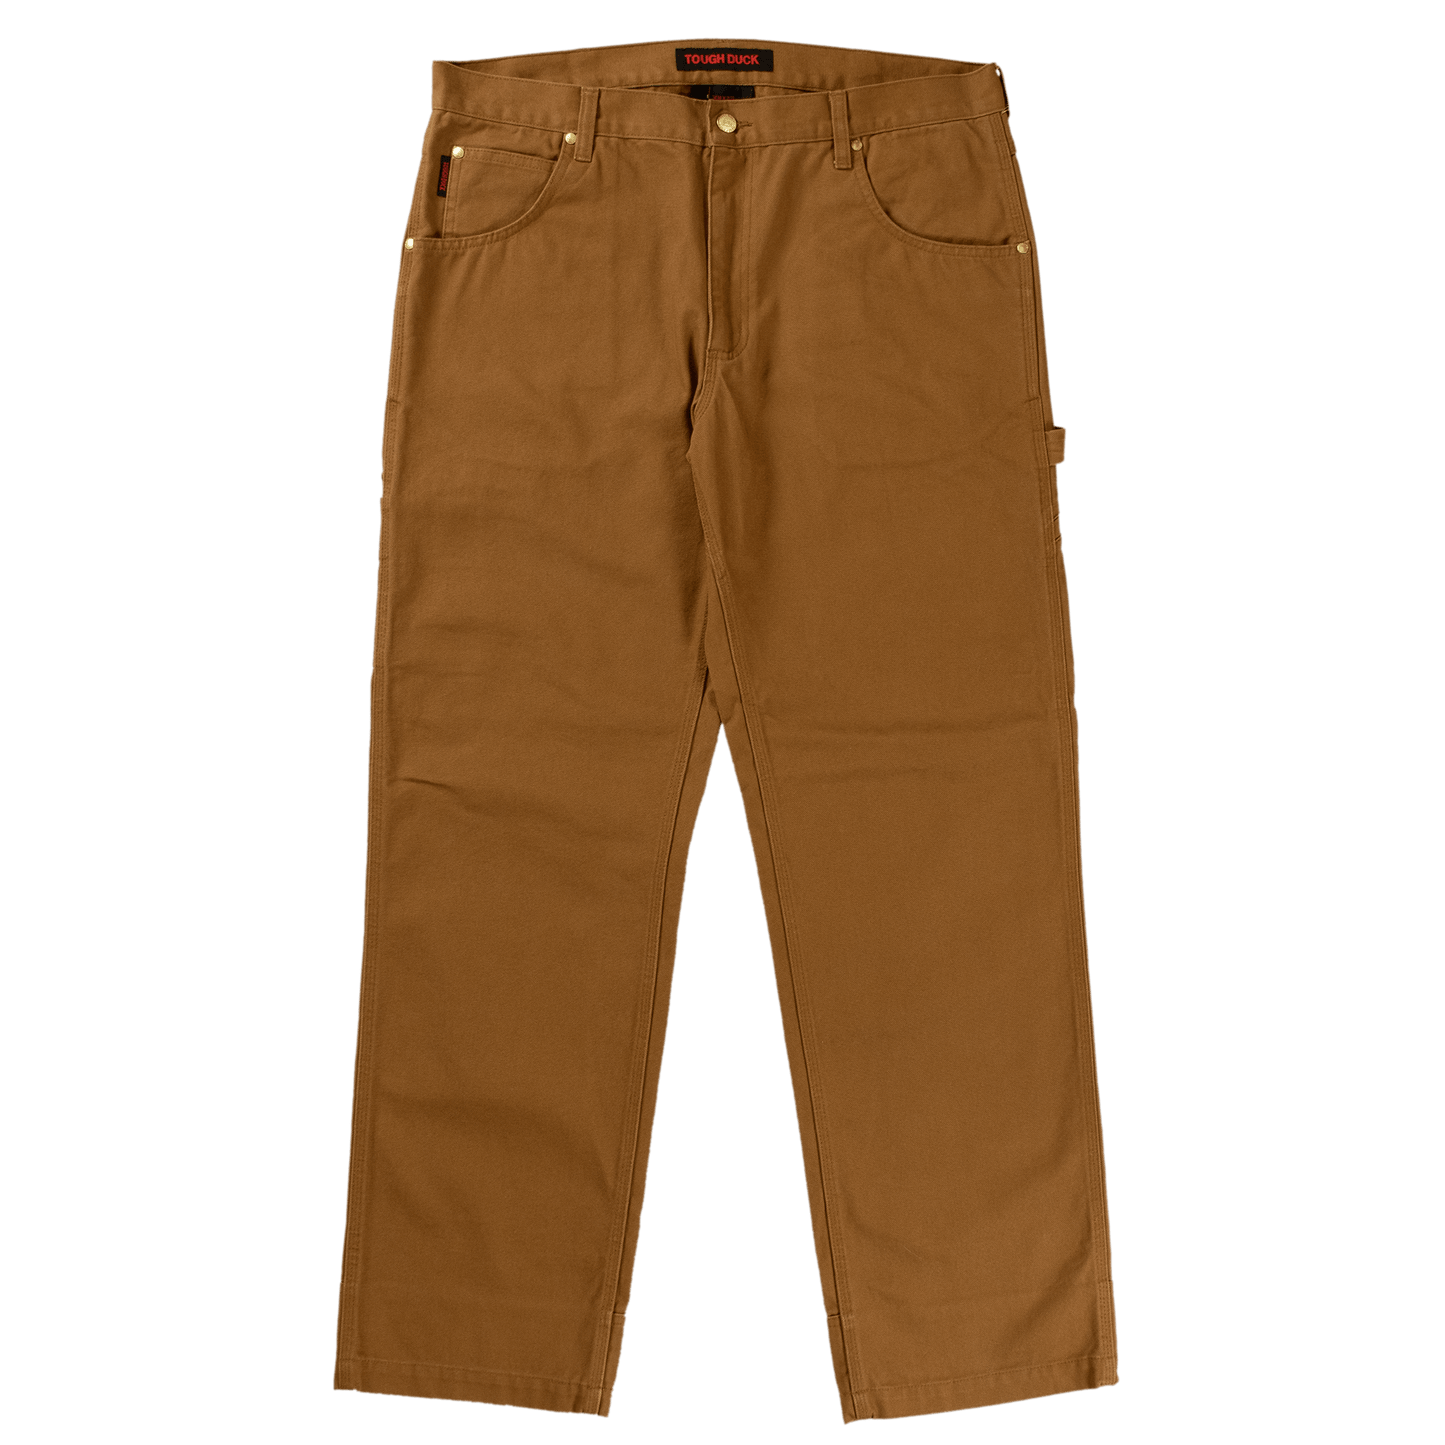 Tough Duck Washed Duck Pants - WP02 - Brown